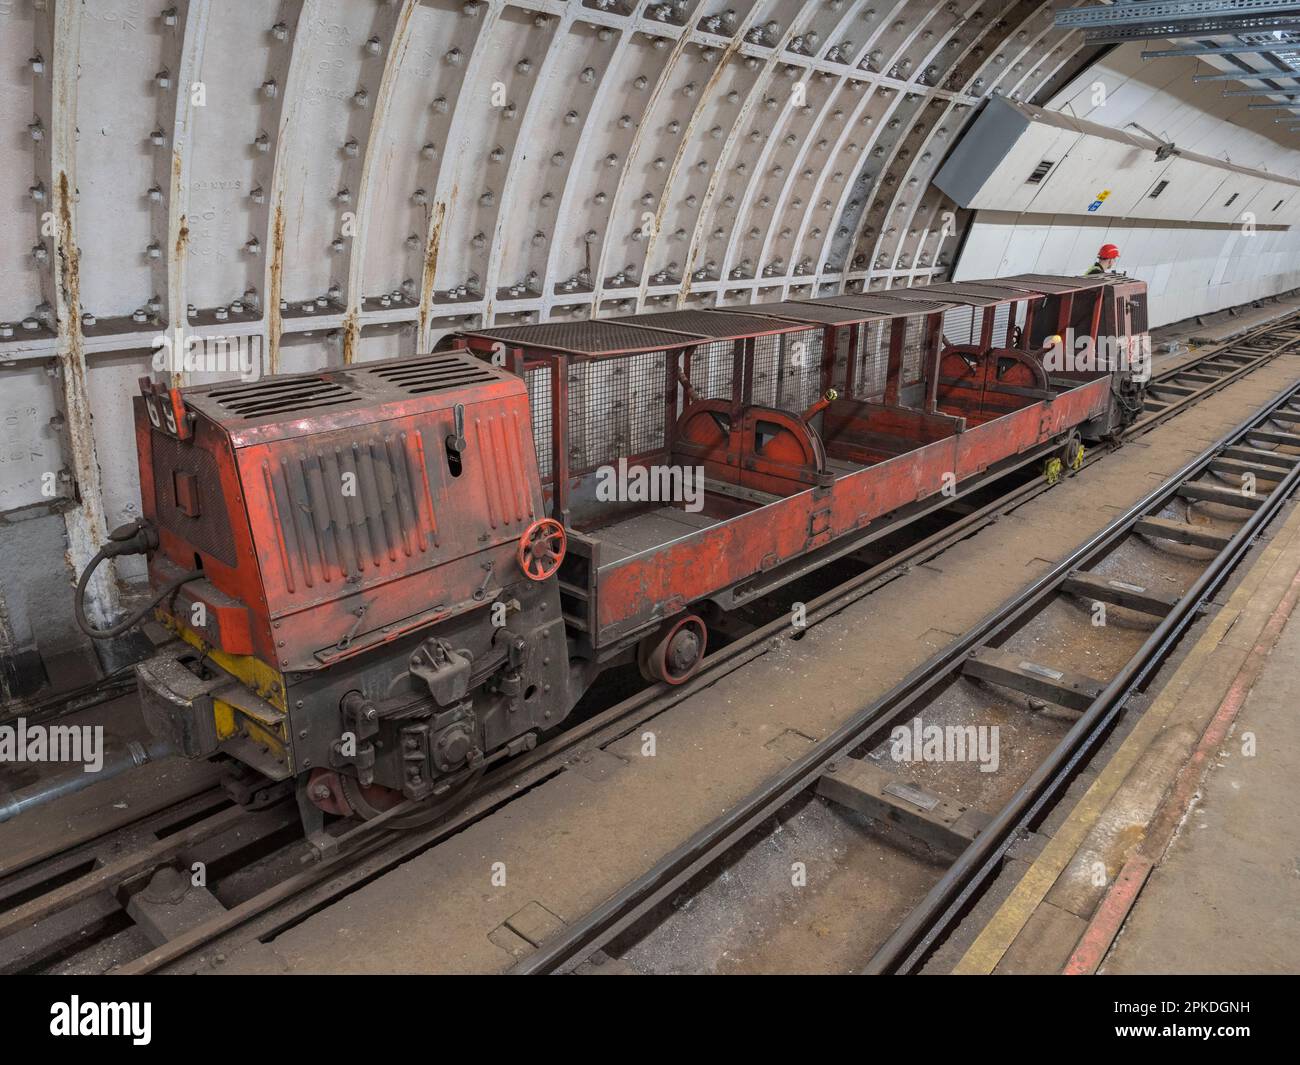 One of the original Mail Rail small train carriages used in the former Post Office Railway system under the streets of central London, UK. Stock Photo